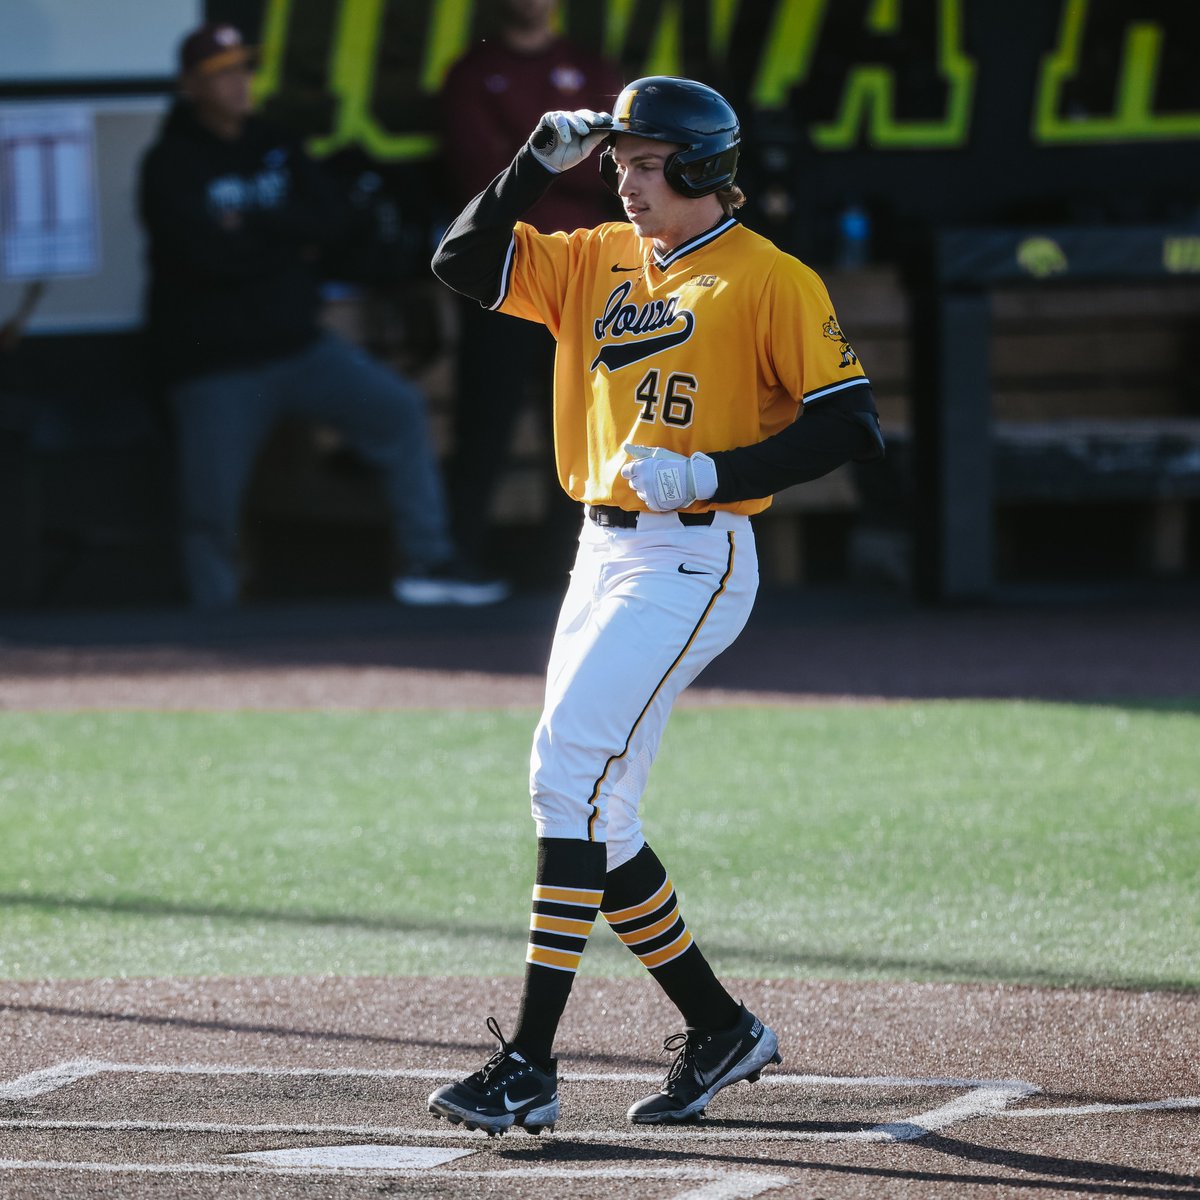 #Hawkeyes are on the board. 

2 RBI double for @dcop38, sacrifice fly for @wilmes_ben and @hennings_connor goes 381 feet for a 2-run blast! 

E1 | Iowa 5, IHCC 0